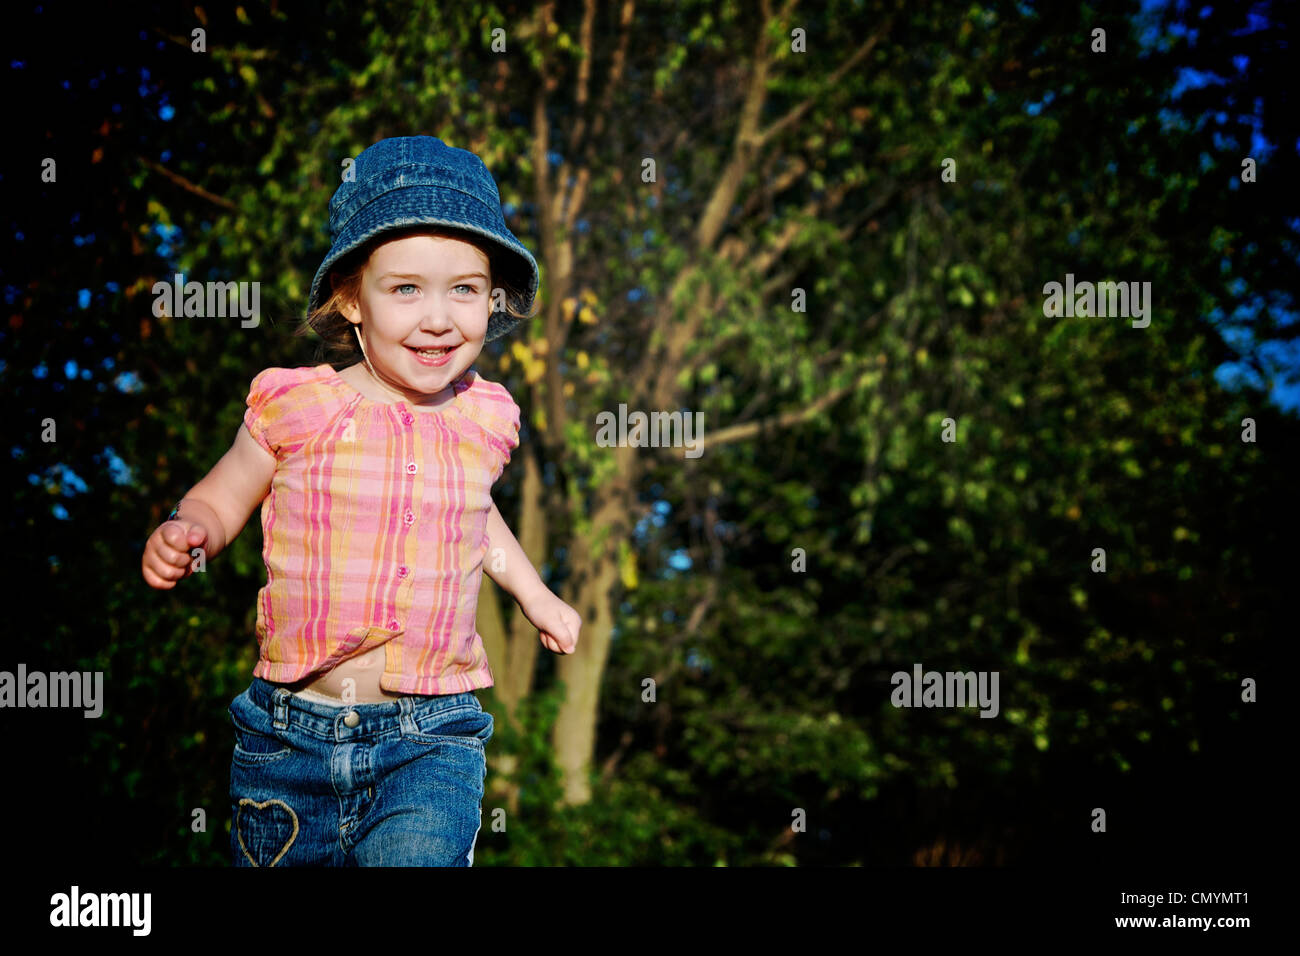 Young girl with blue denim hat running, Otterburn Park, Quebec Stock Photo